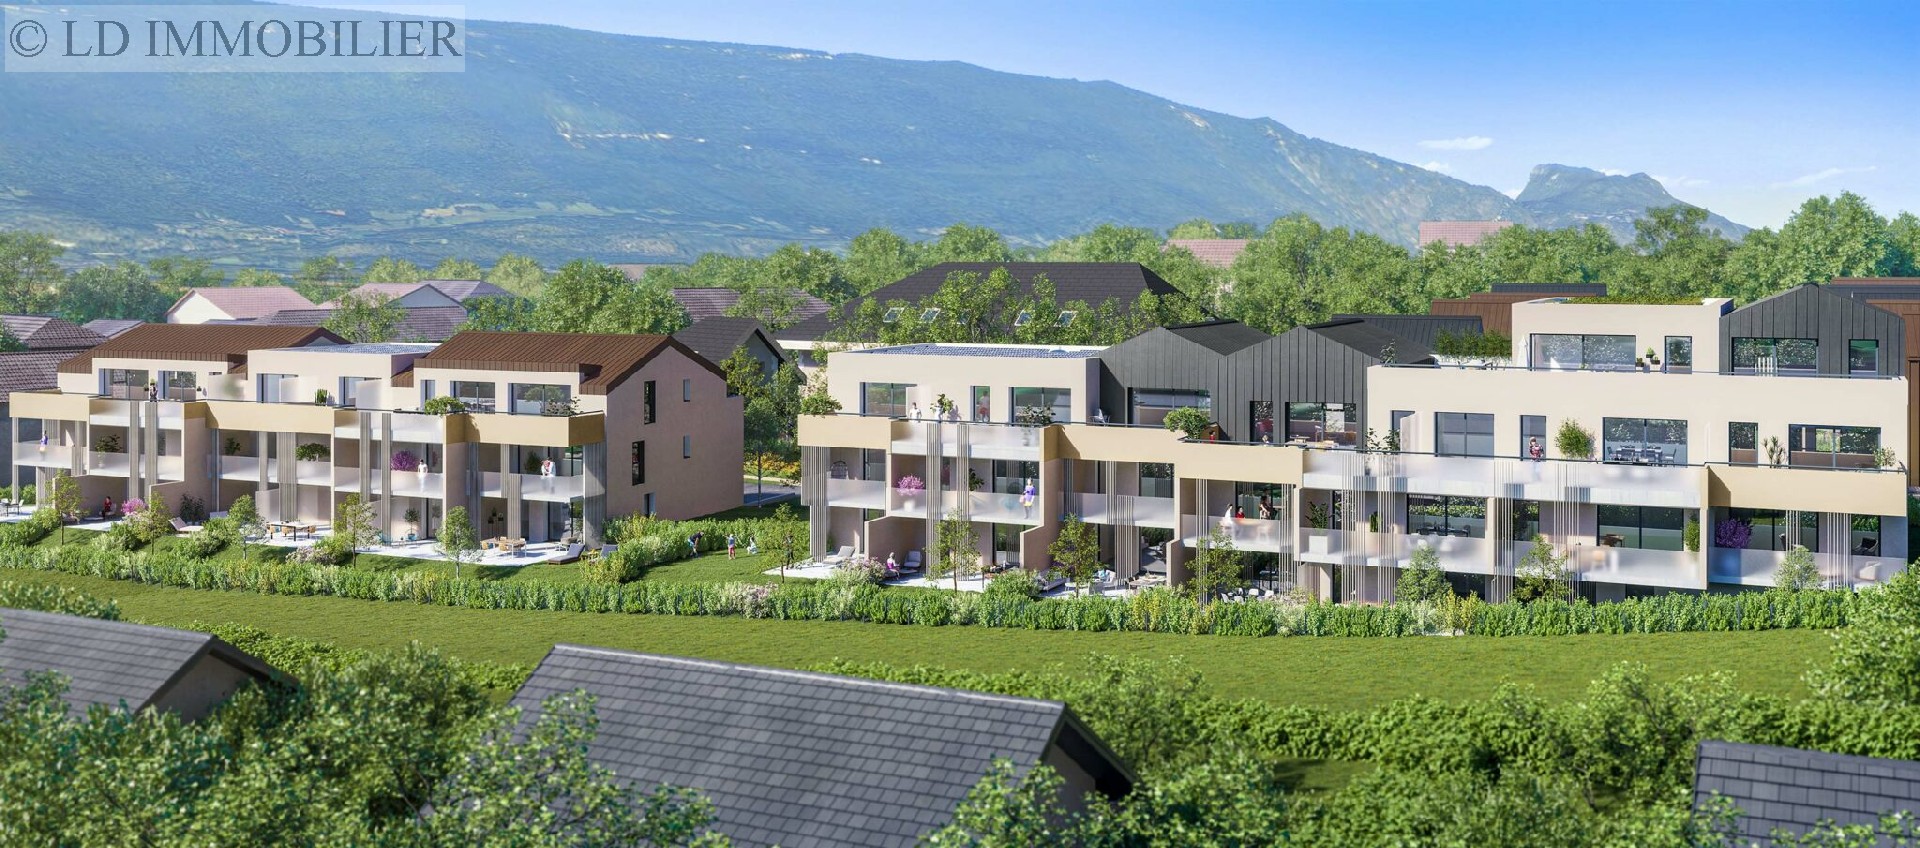 Vente appartement - CHAMBERY 51,8 m², 2 pièces